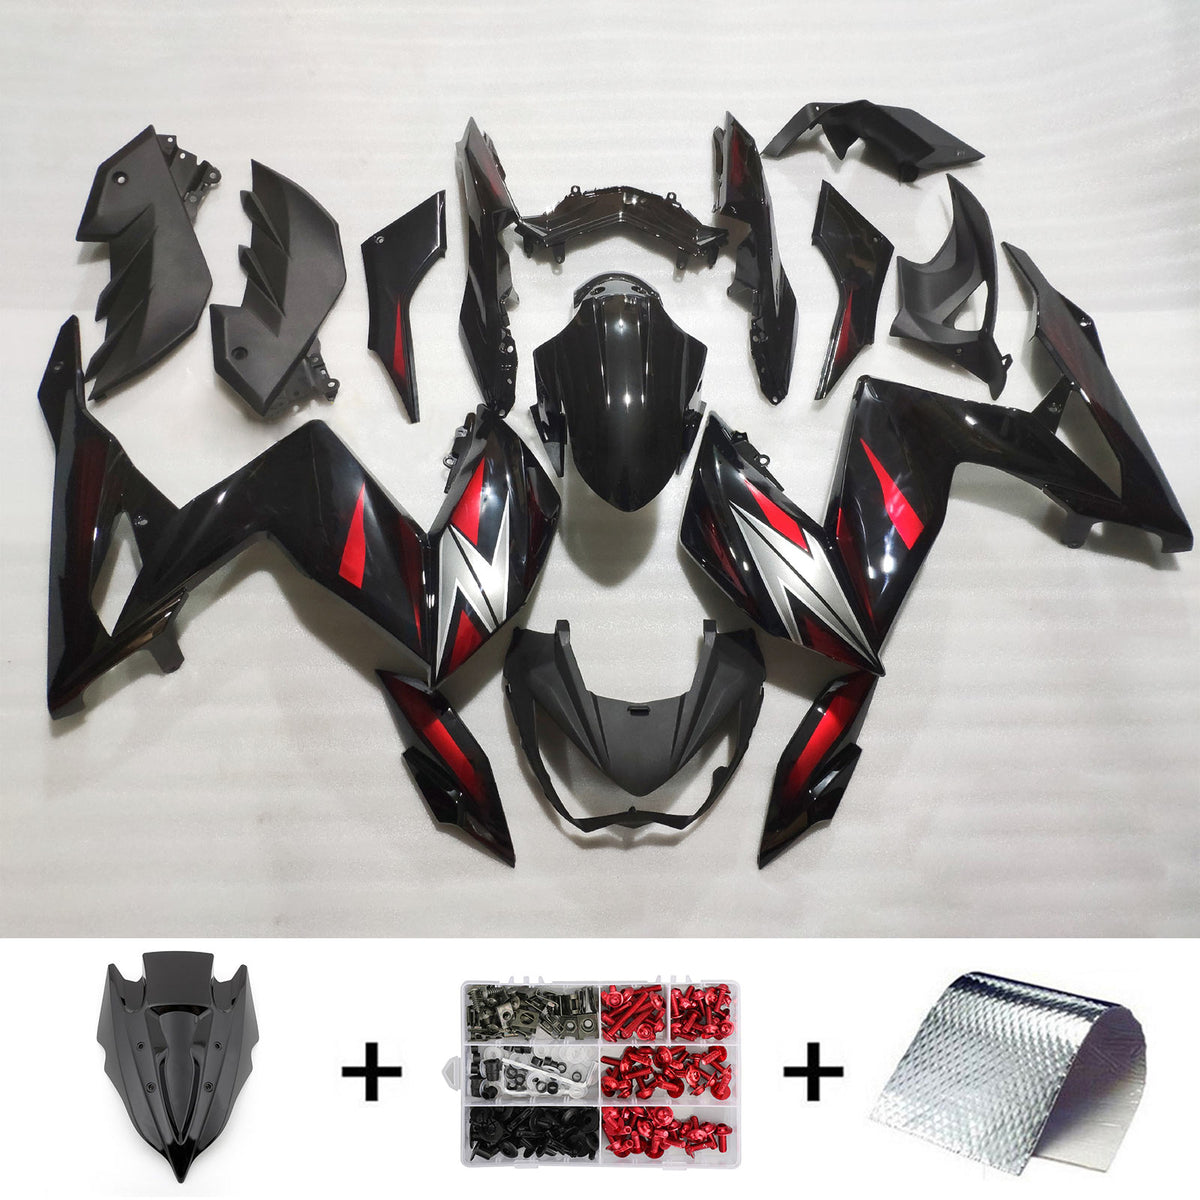 Amotopart 2015-2016 Z250 Z300 Kawasaki Black with Red Accent Fairing Kit